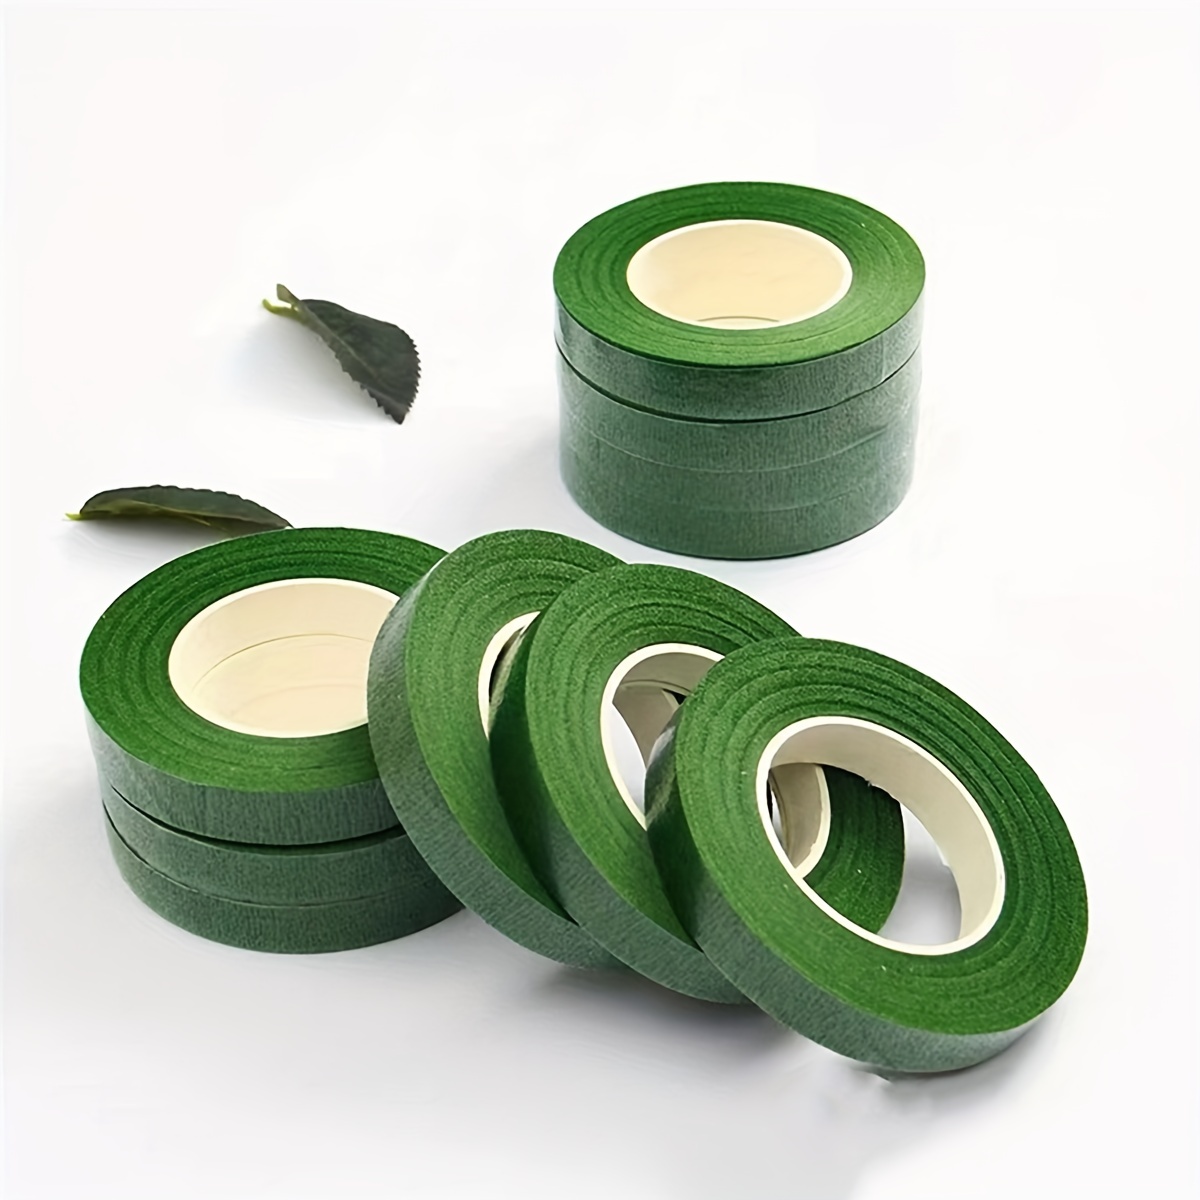 3rolls floral tape for Artificial flowers fondant cake 30yards 3 color  green white brown